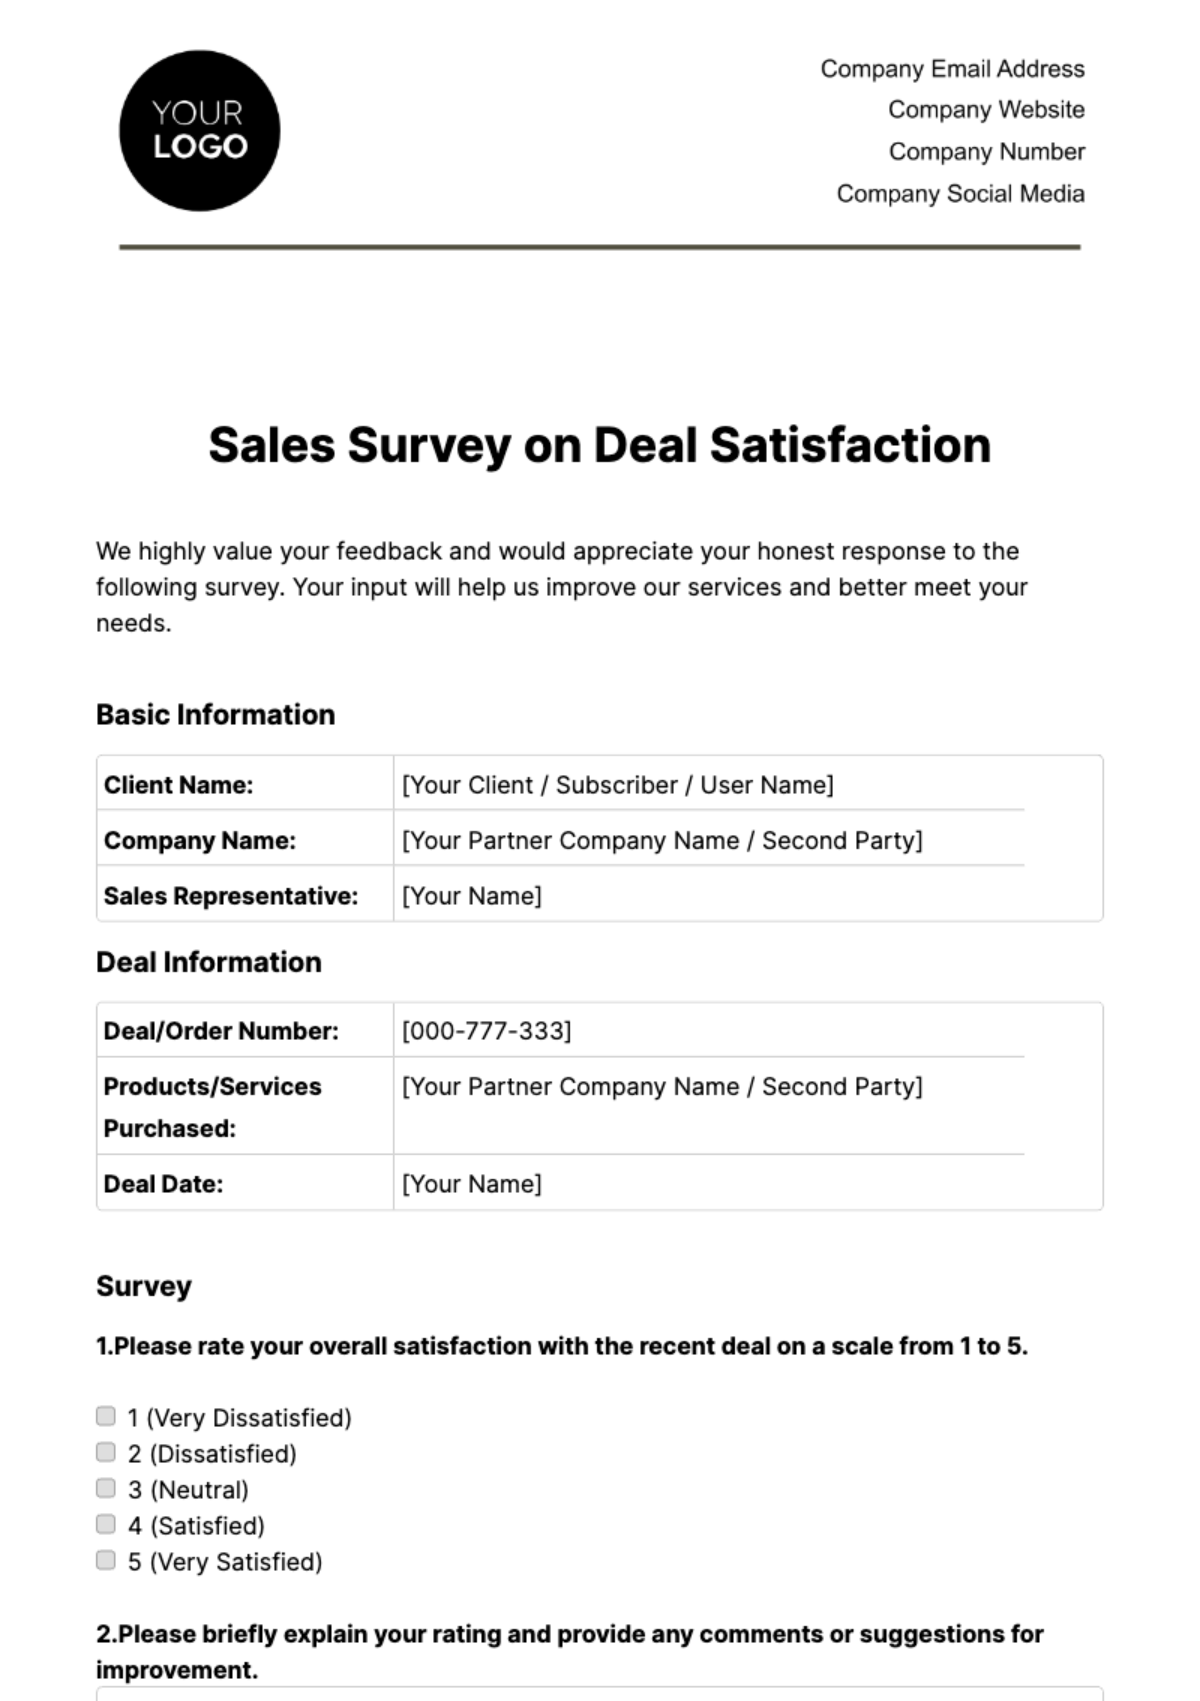 Sales Survey on Deal Satisfaction Template